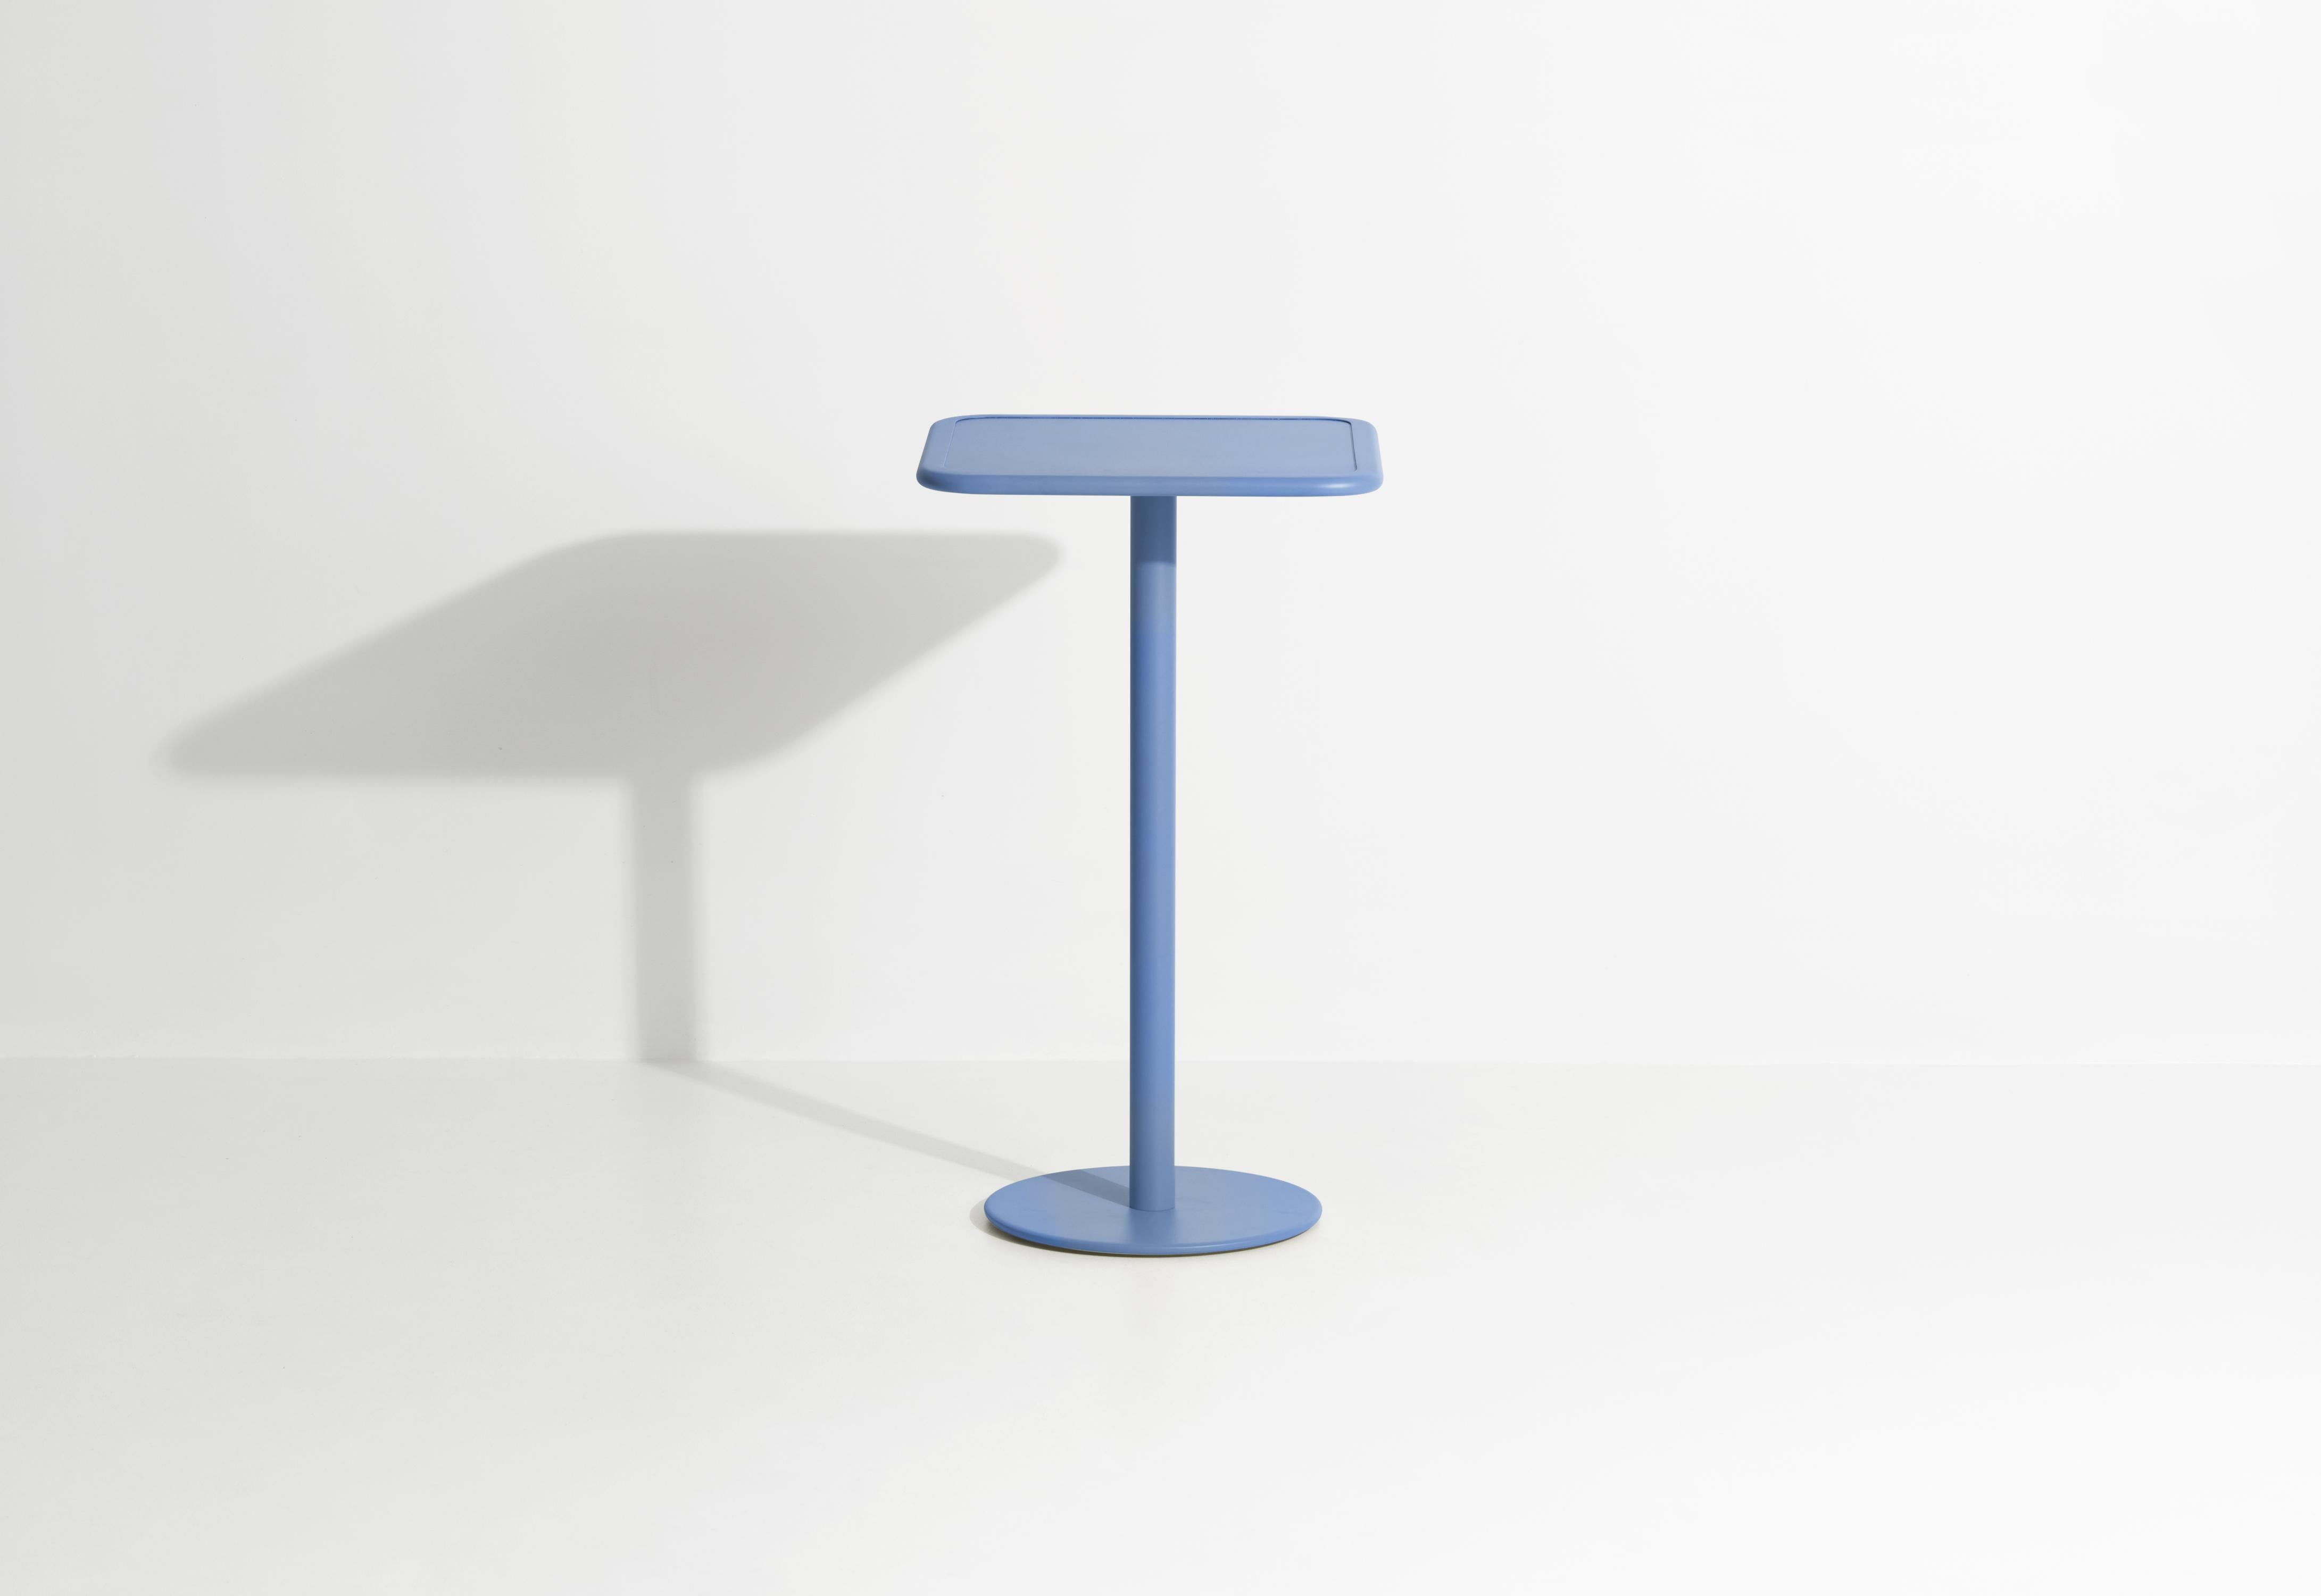 Petite Friture Week-End Square High Table in Azure Blue Aluminium by Studio BrichetZiegler, 2017

The week-end collection is a full range of outdoor furniture, in aluminium grained epoxy paint, matt finish, that includes 18 functions and 8 colours